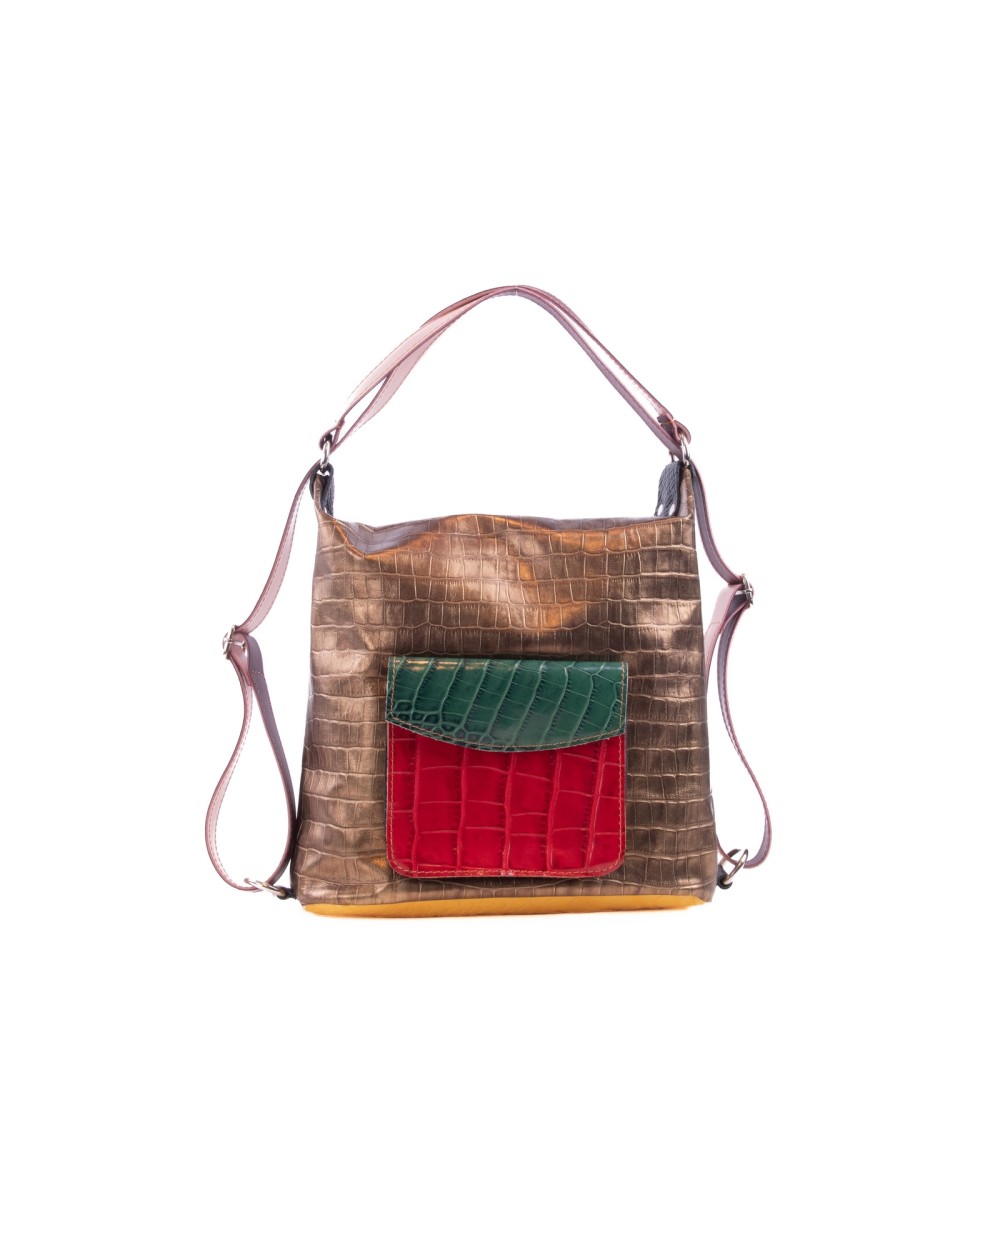 Small Backpack - Patchwork leather bag / backpack